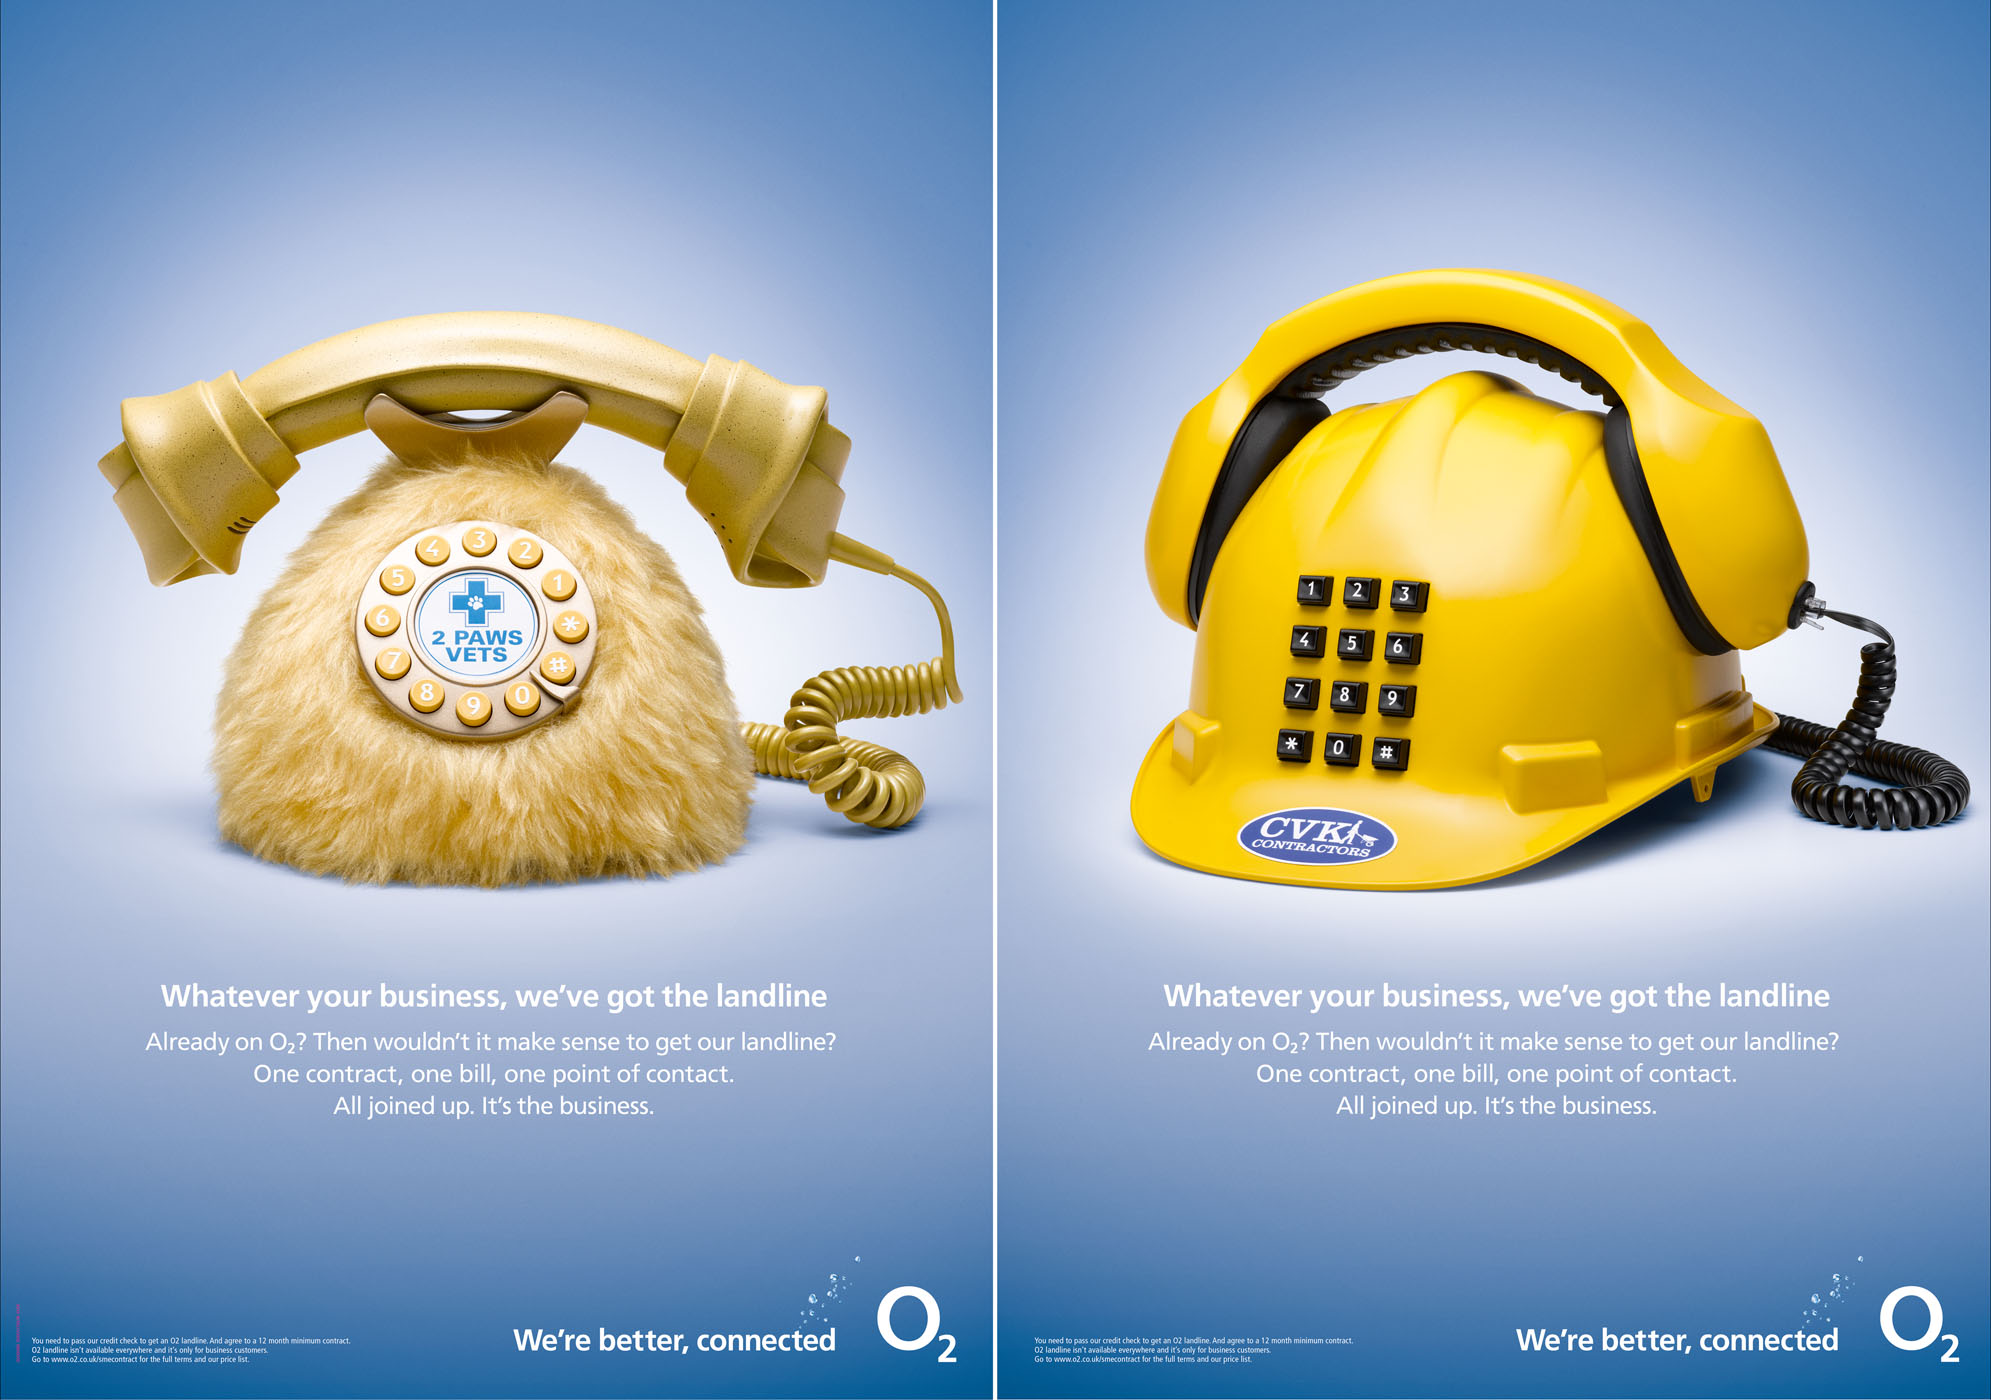 Novelty phone on blue background by Alexander Kent London based still life and product photographer.